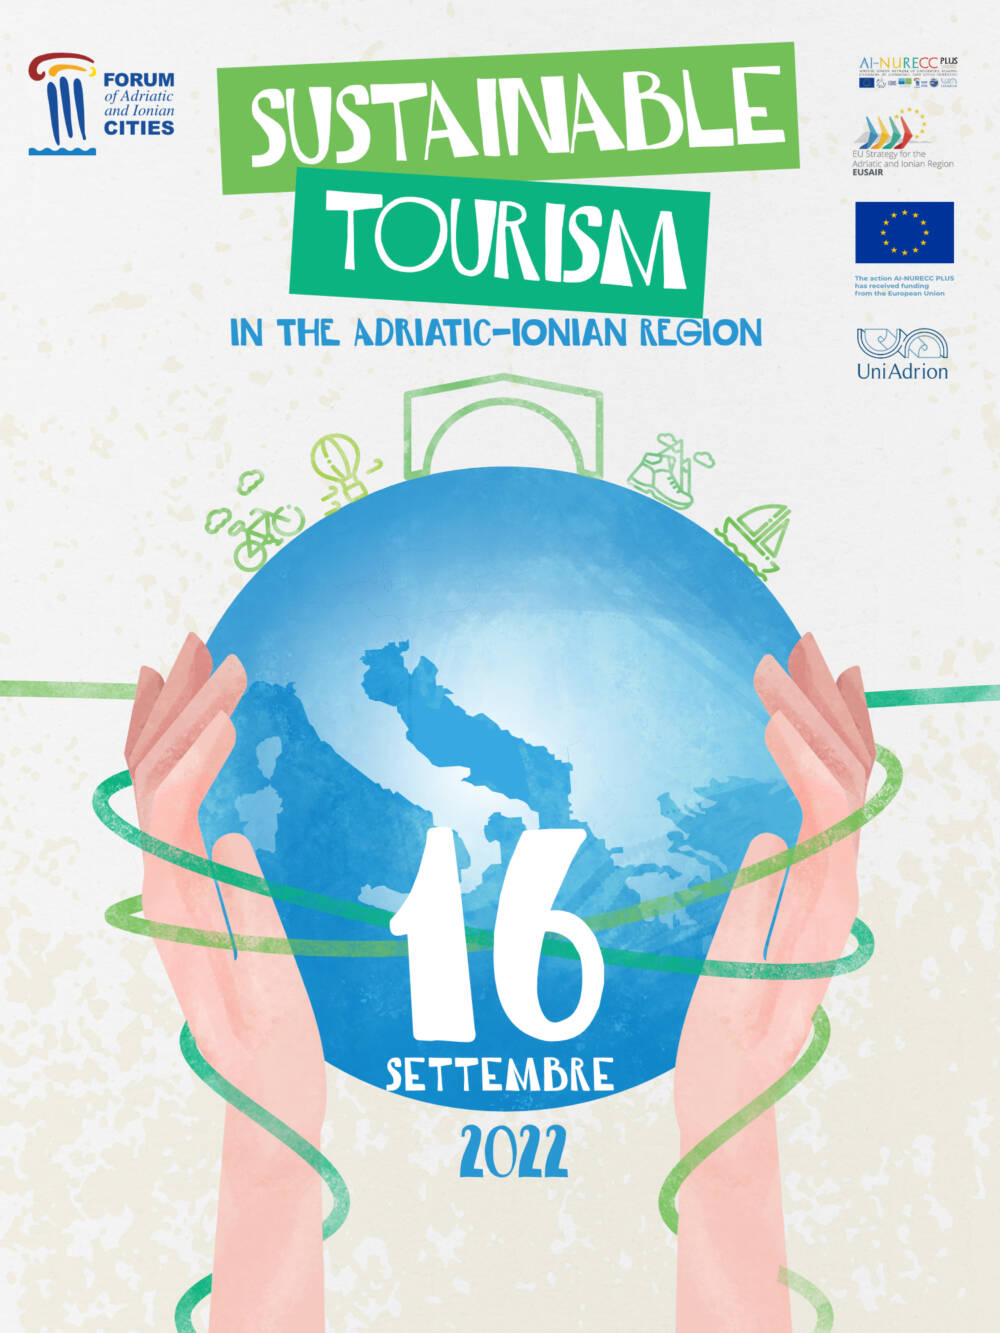 SAVE THE DATE! AI-NURECC PLUS FAIR & CONFERENCE ON SUSTAINABLE TOURISM IN THE ADRIATIC-IONIAN REGION